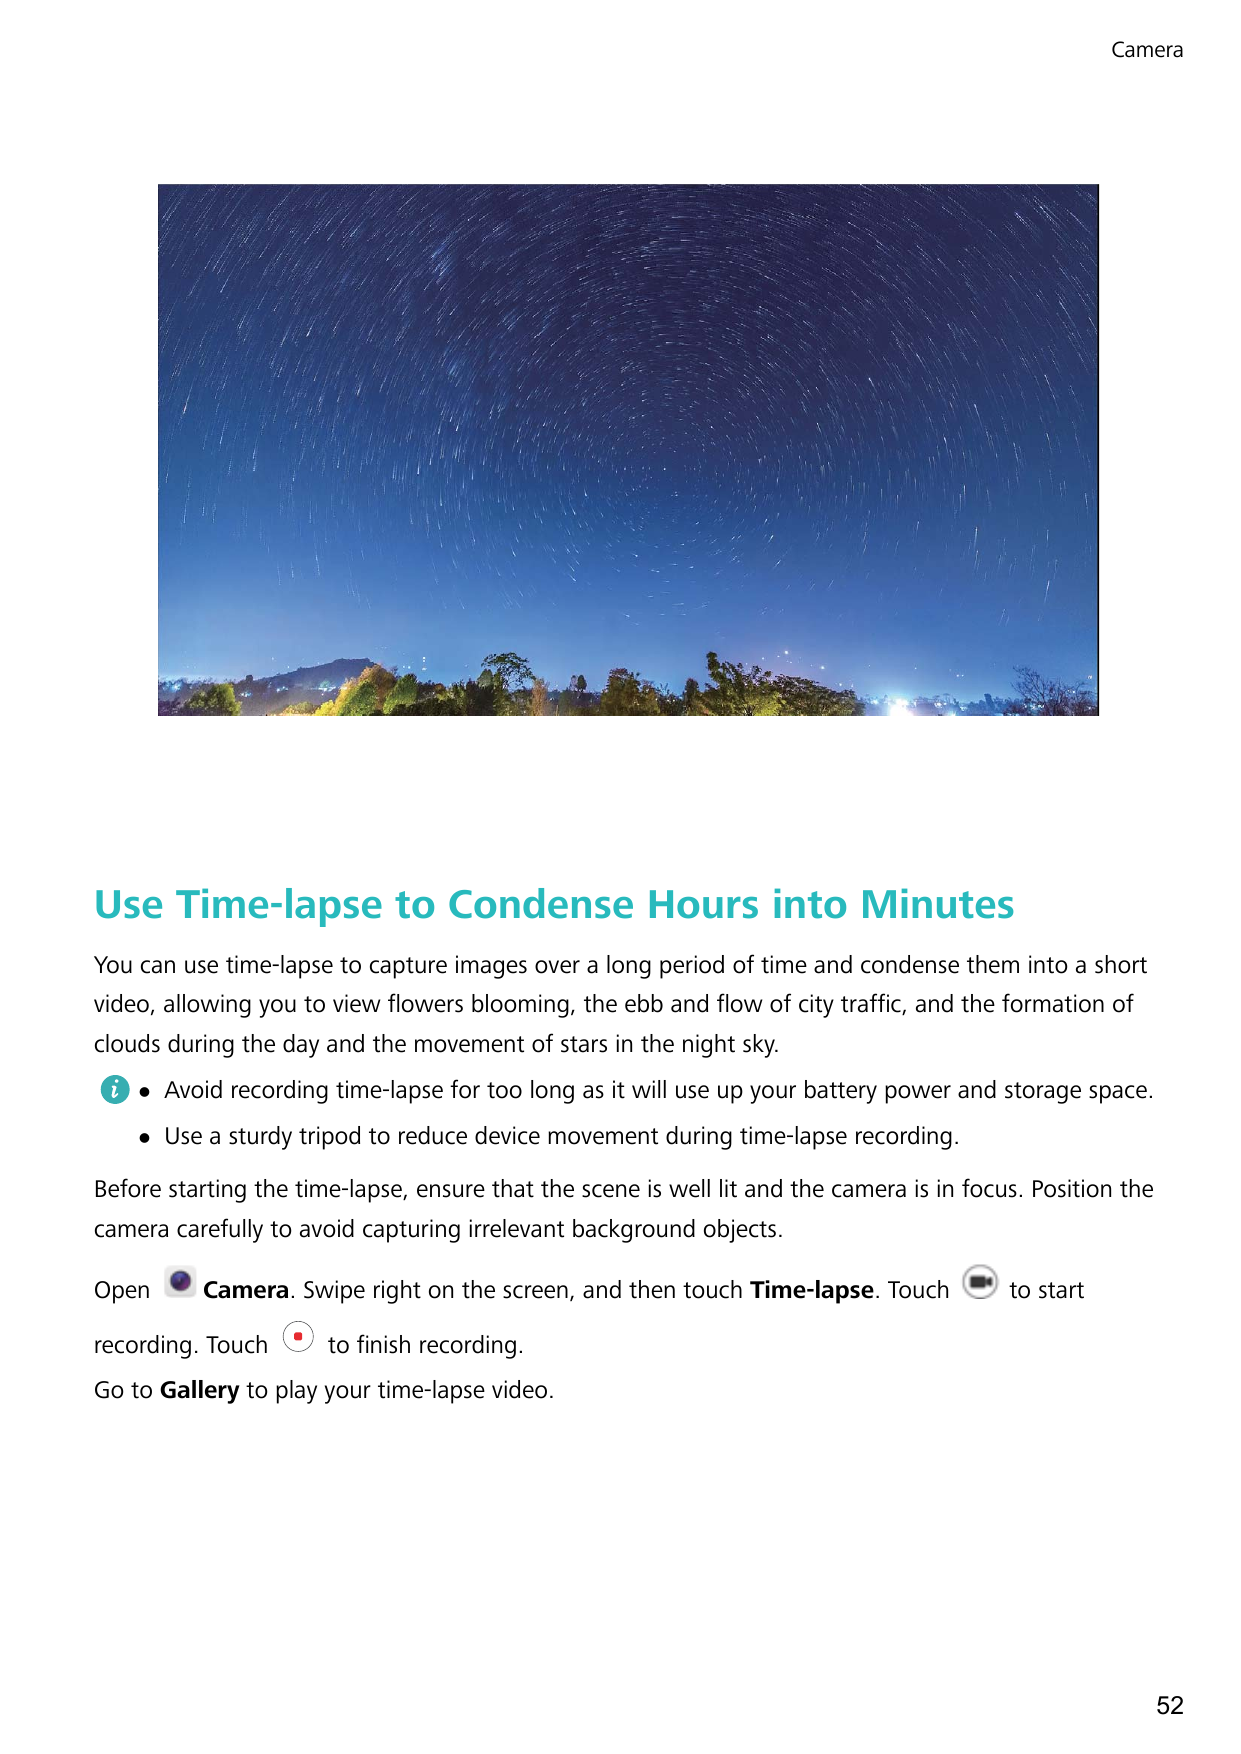 CameraUse Time-lapse to Condense Hours into MinutesYou can use time-lapse to capture images over a long period of time and conde